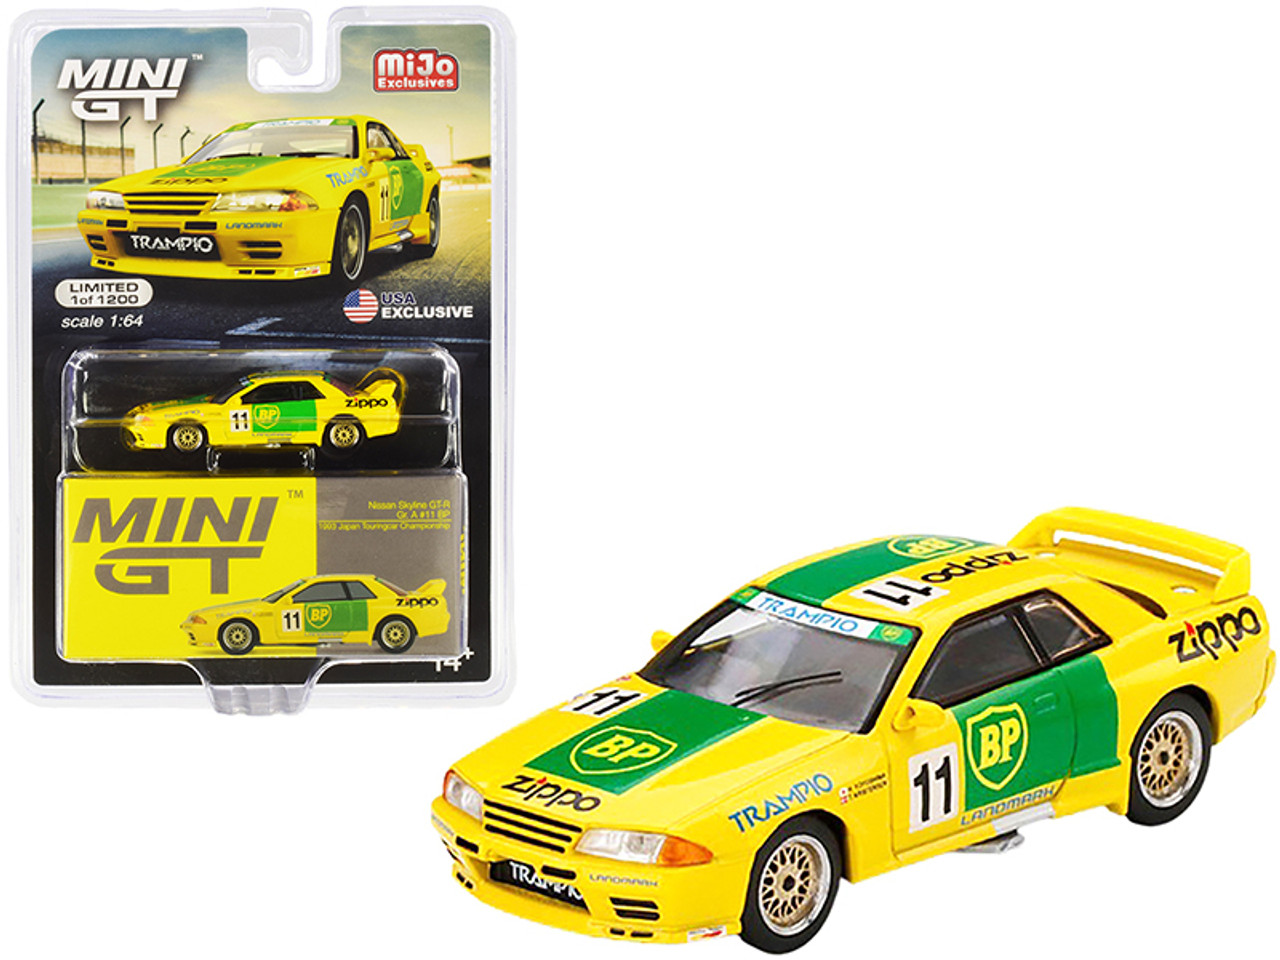 Nissan Skyline GT-R R32 Gr. A RHD (Right Hand Drive) #11 "BP" Japan Touring Car Championship JTCC (1993) Limited Edition to 1200 pieces Worldwide 1/64 Diecast Model Car by True Scale Miniatures